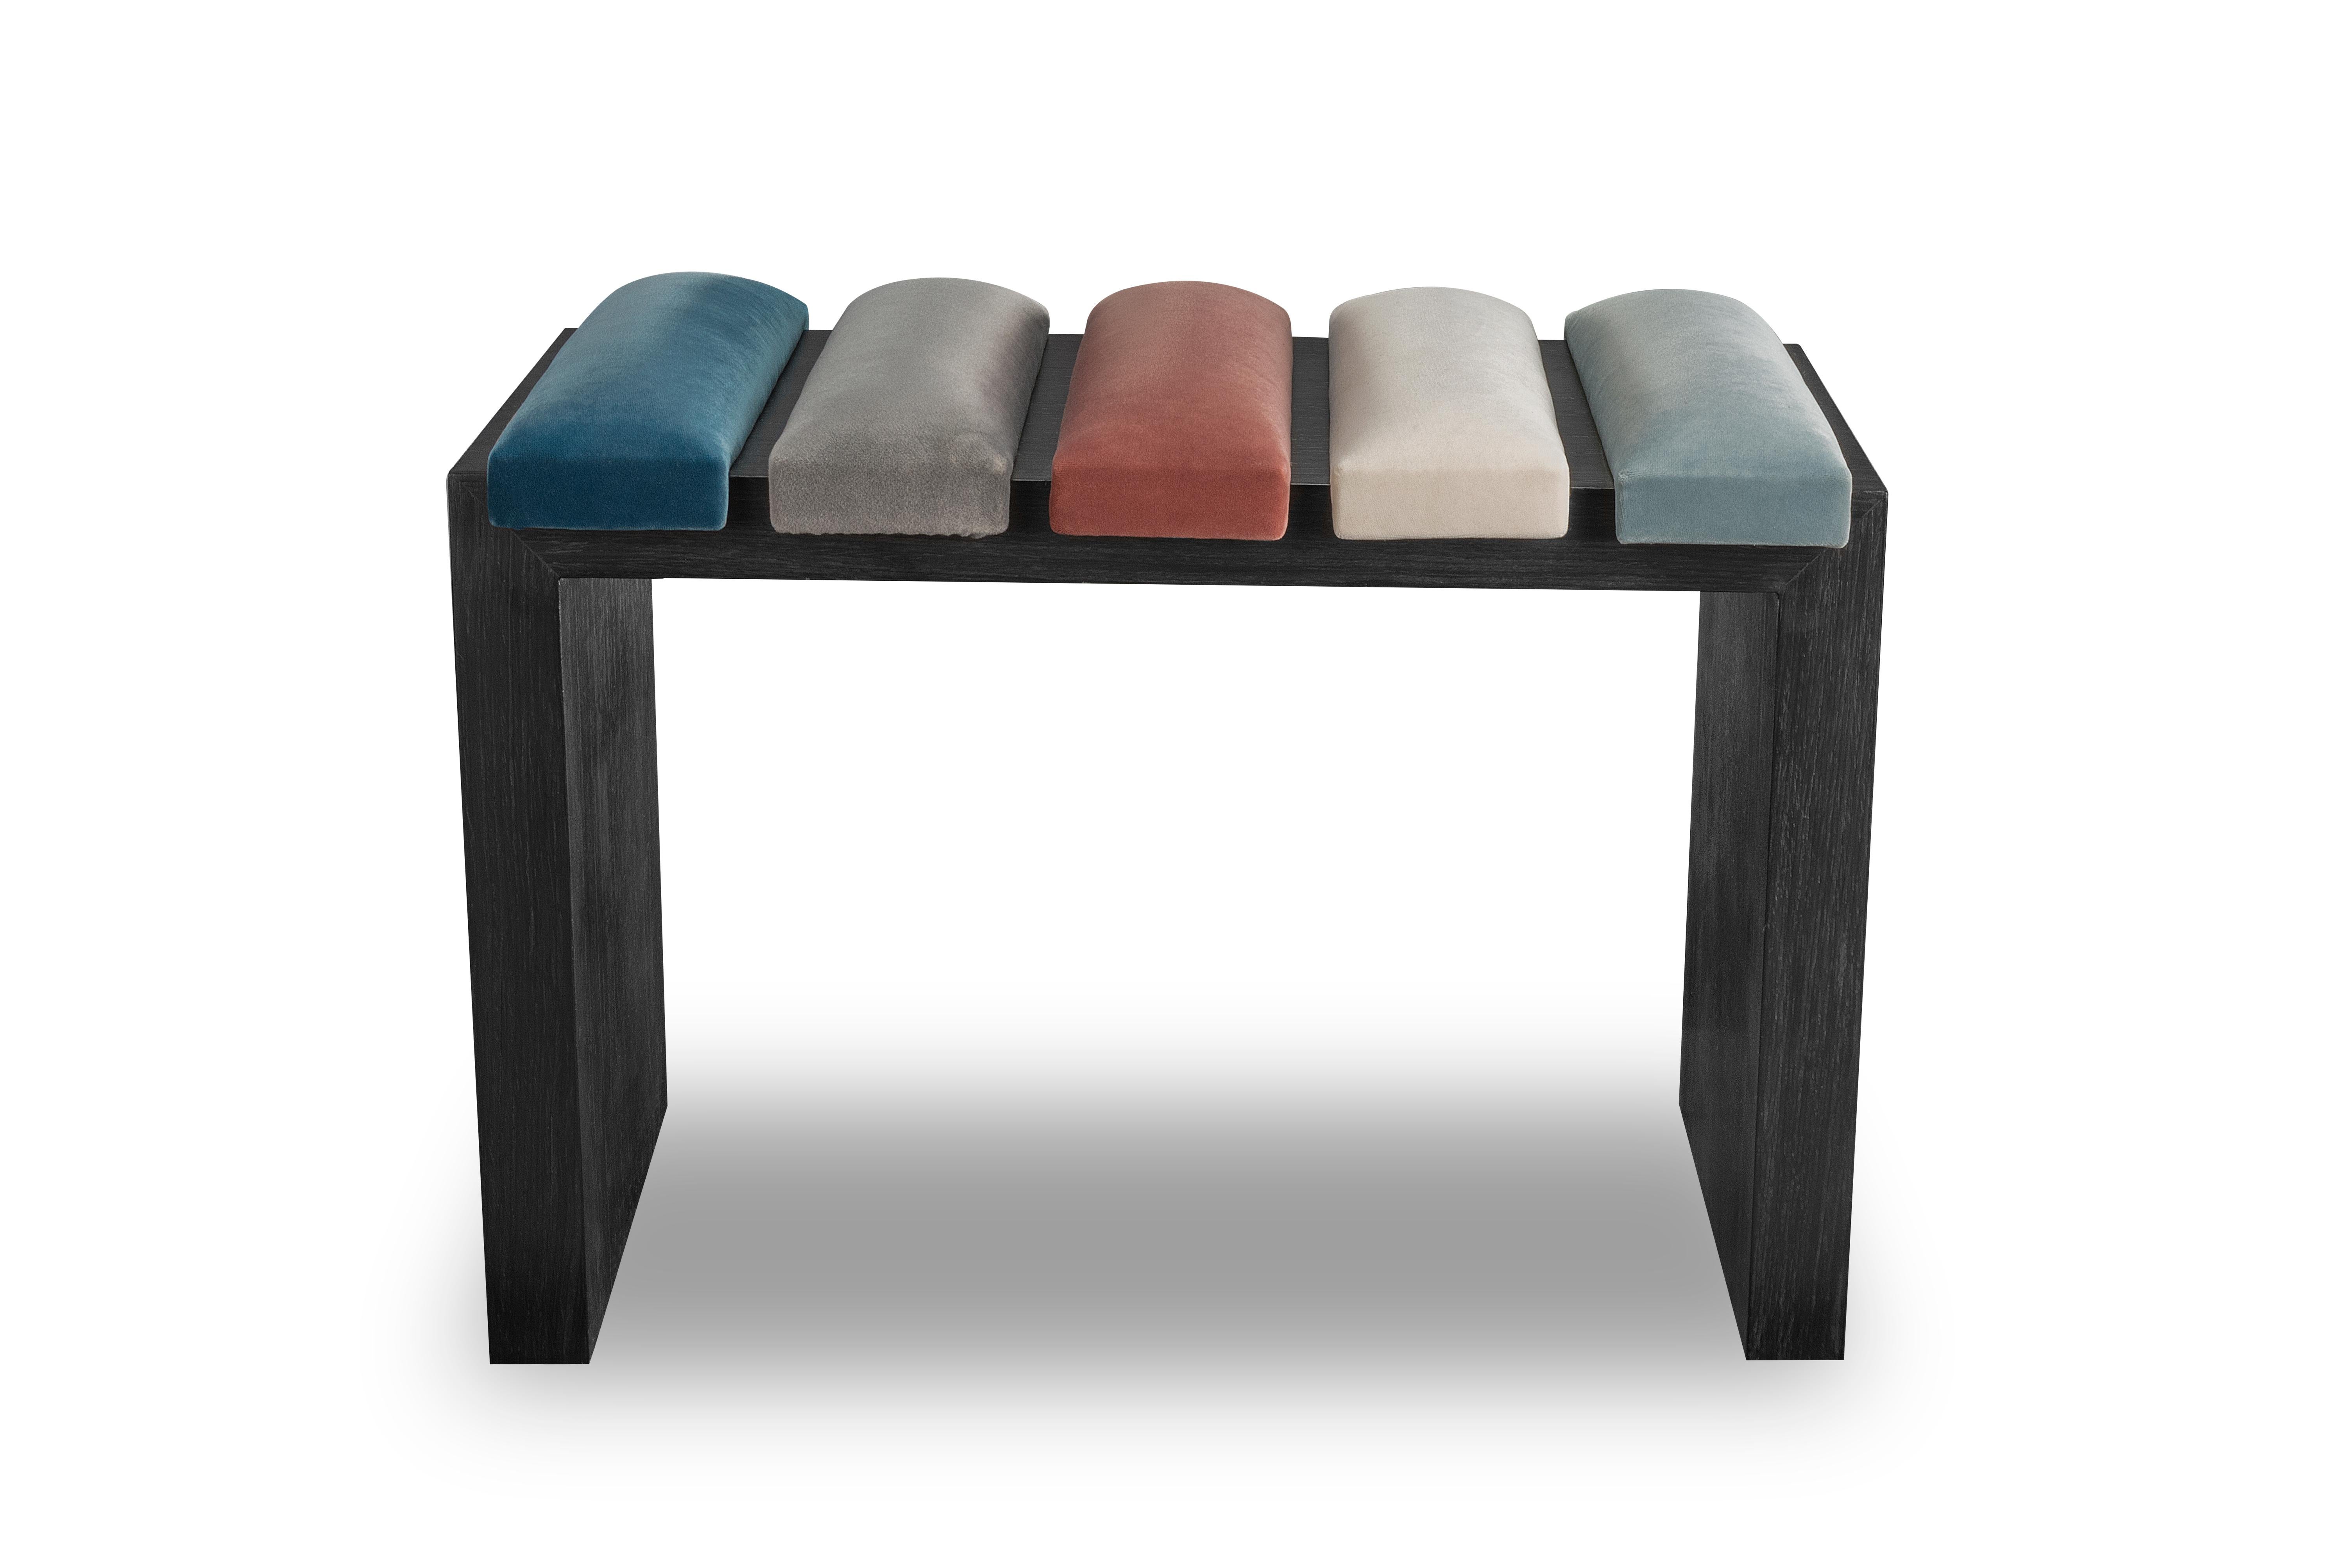 price listed per piece 
Materials: Black wenge veneer and velvet fabric
Dimensions: 61Wx40Dx45H cm

“The Piano” stool is a tribute to the sound of life. Each key , played
with a resonance of color, it reminisces the moment in which taken
by music we